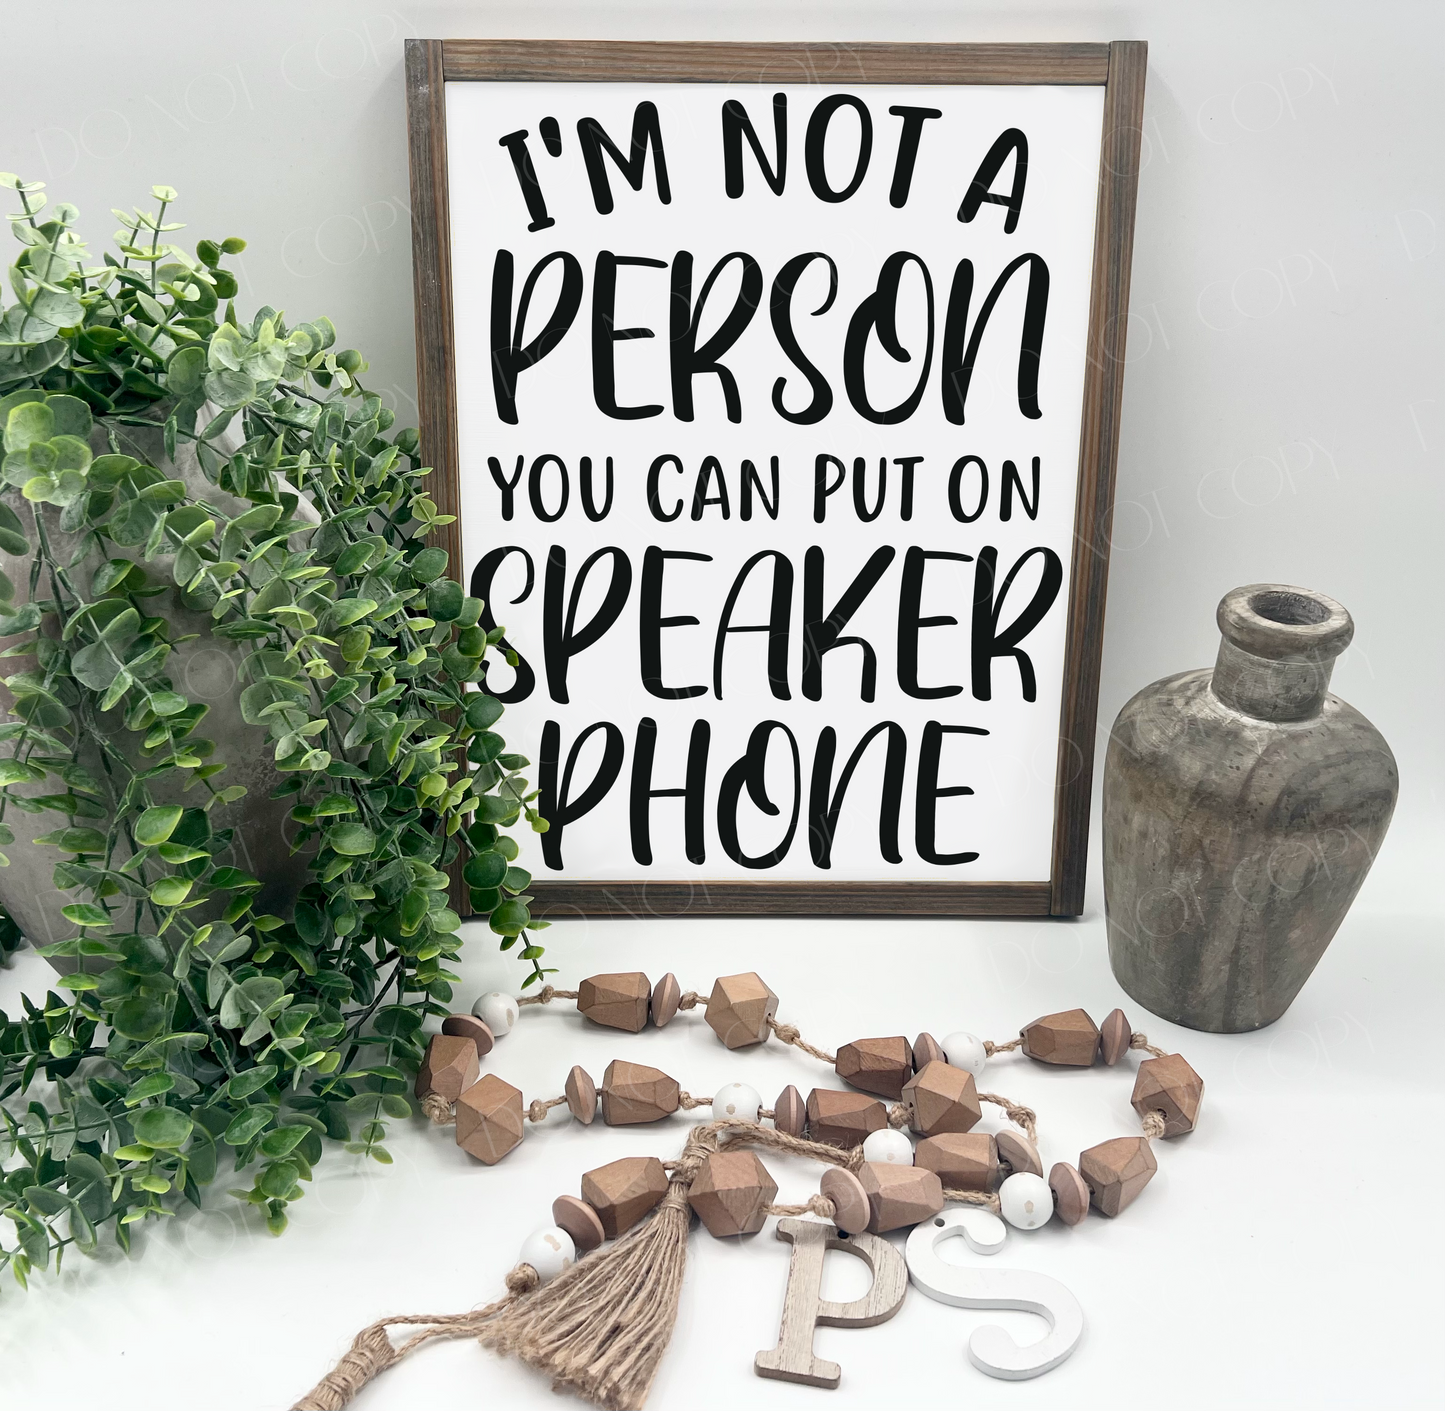 I’m Not A Person You Can Put On Speaker Phone - White/Thick/W. Gray - Wood Sign